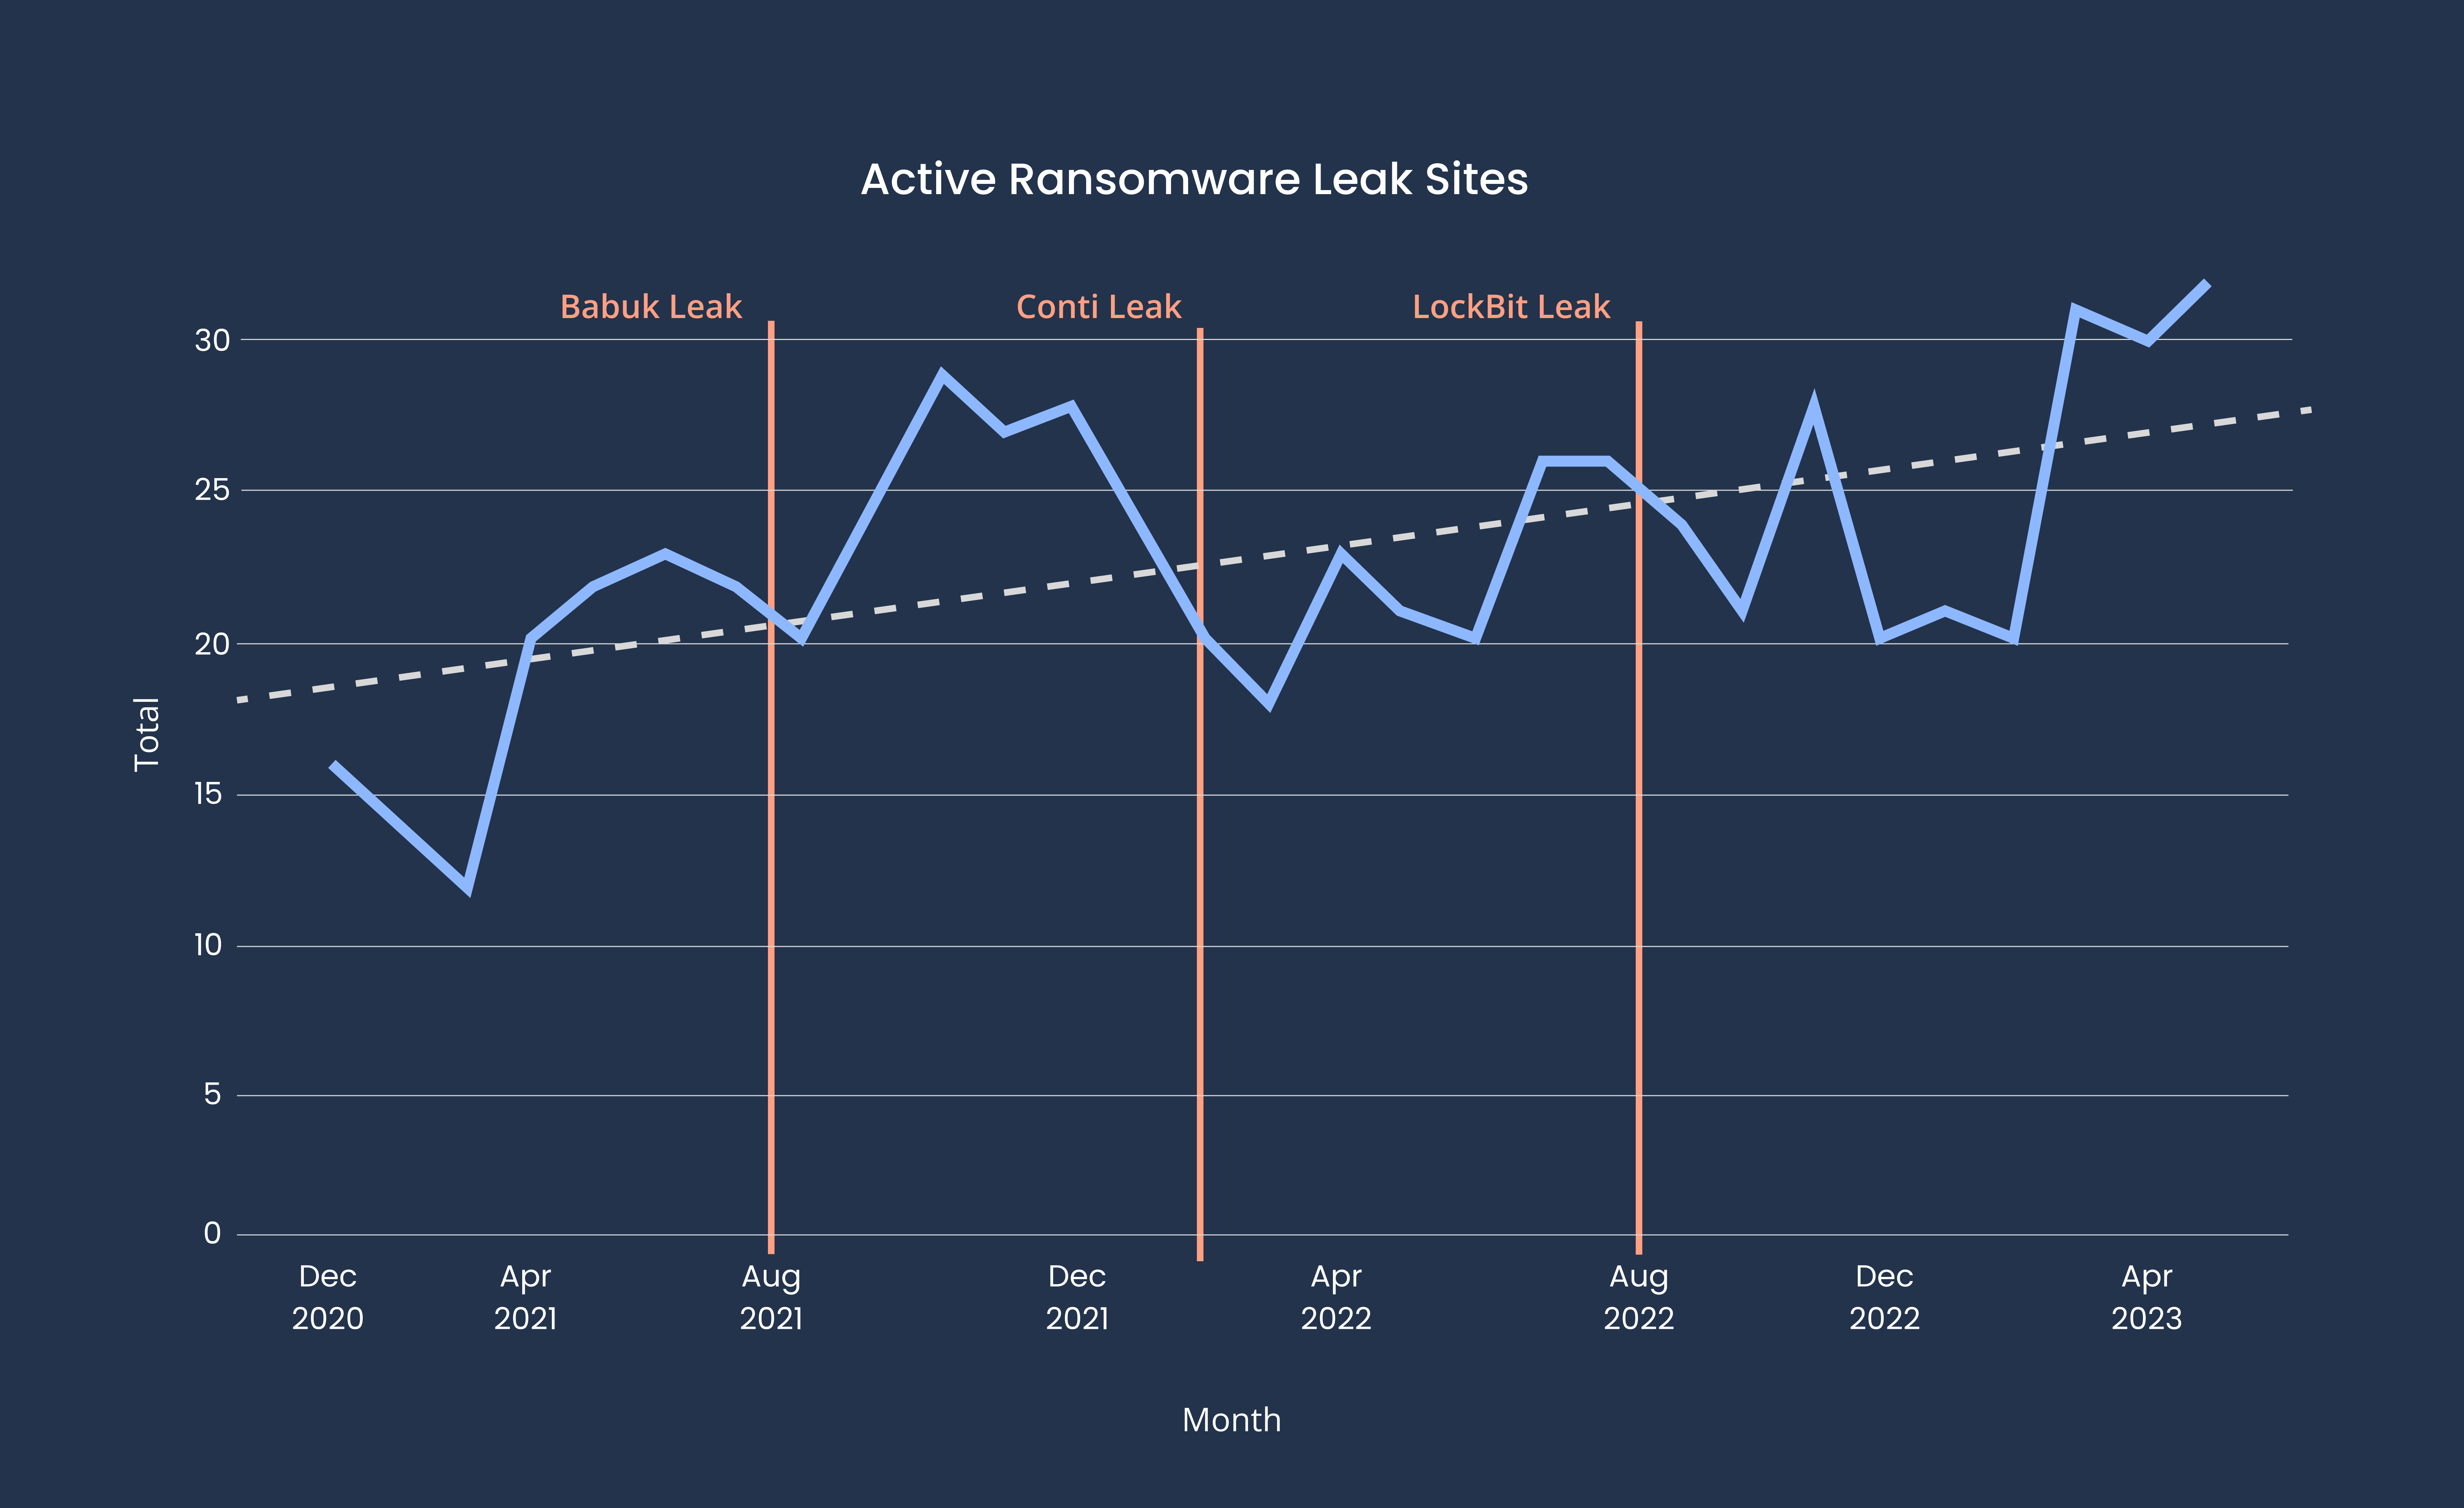 [LINE GRAPH] Active Ransomware Leak Sites from December 2020 - April 2023